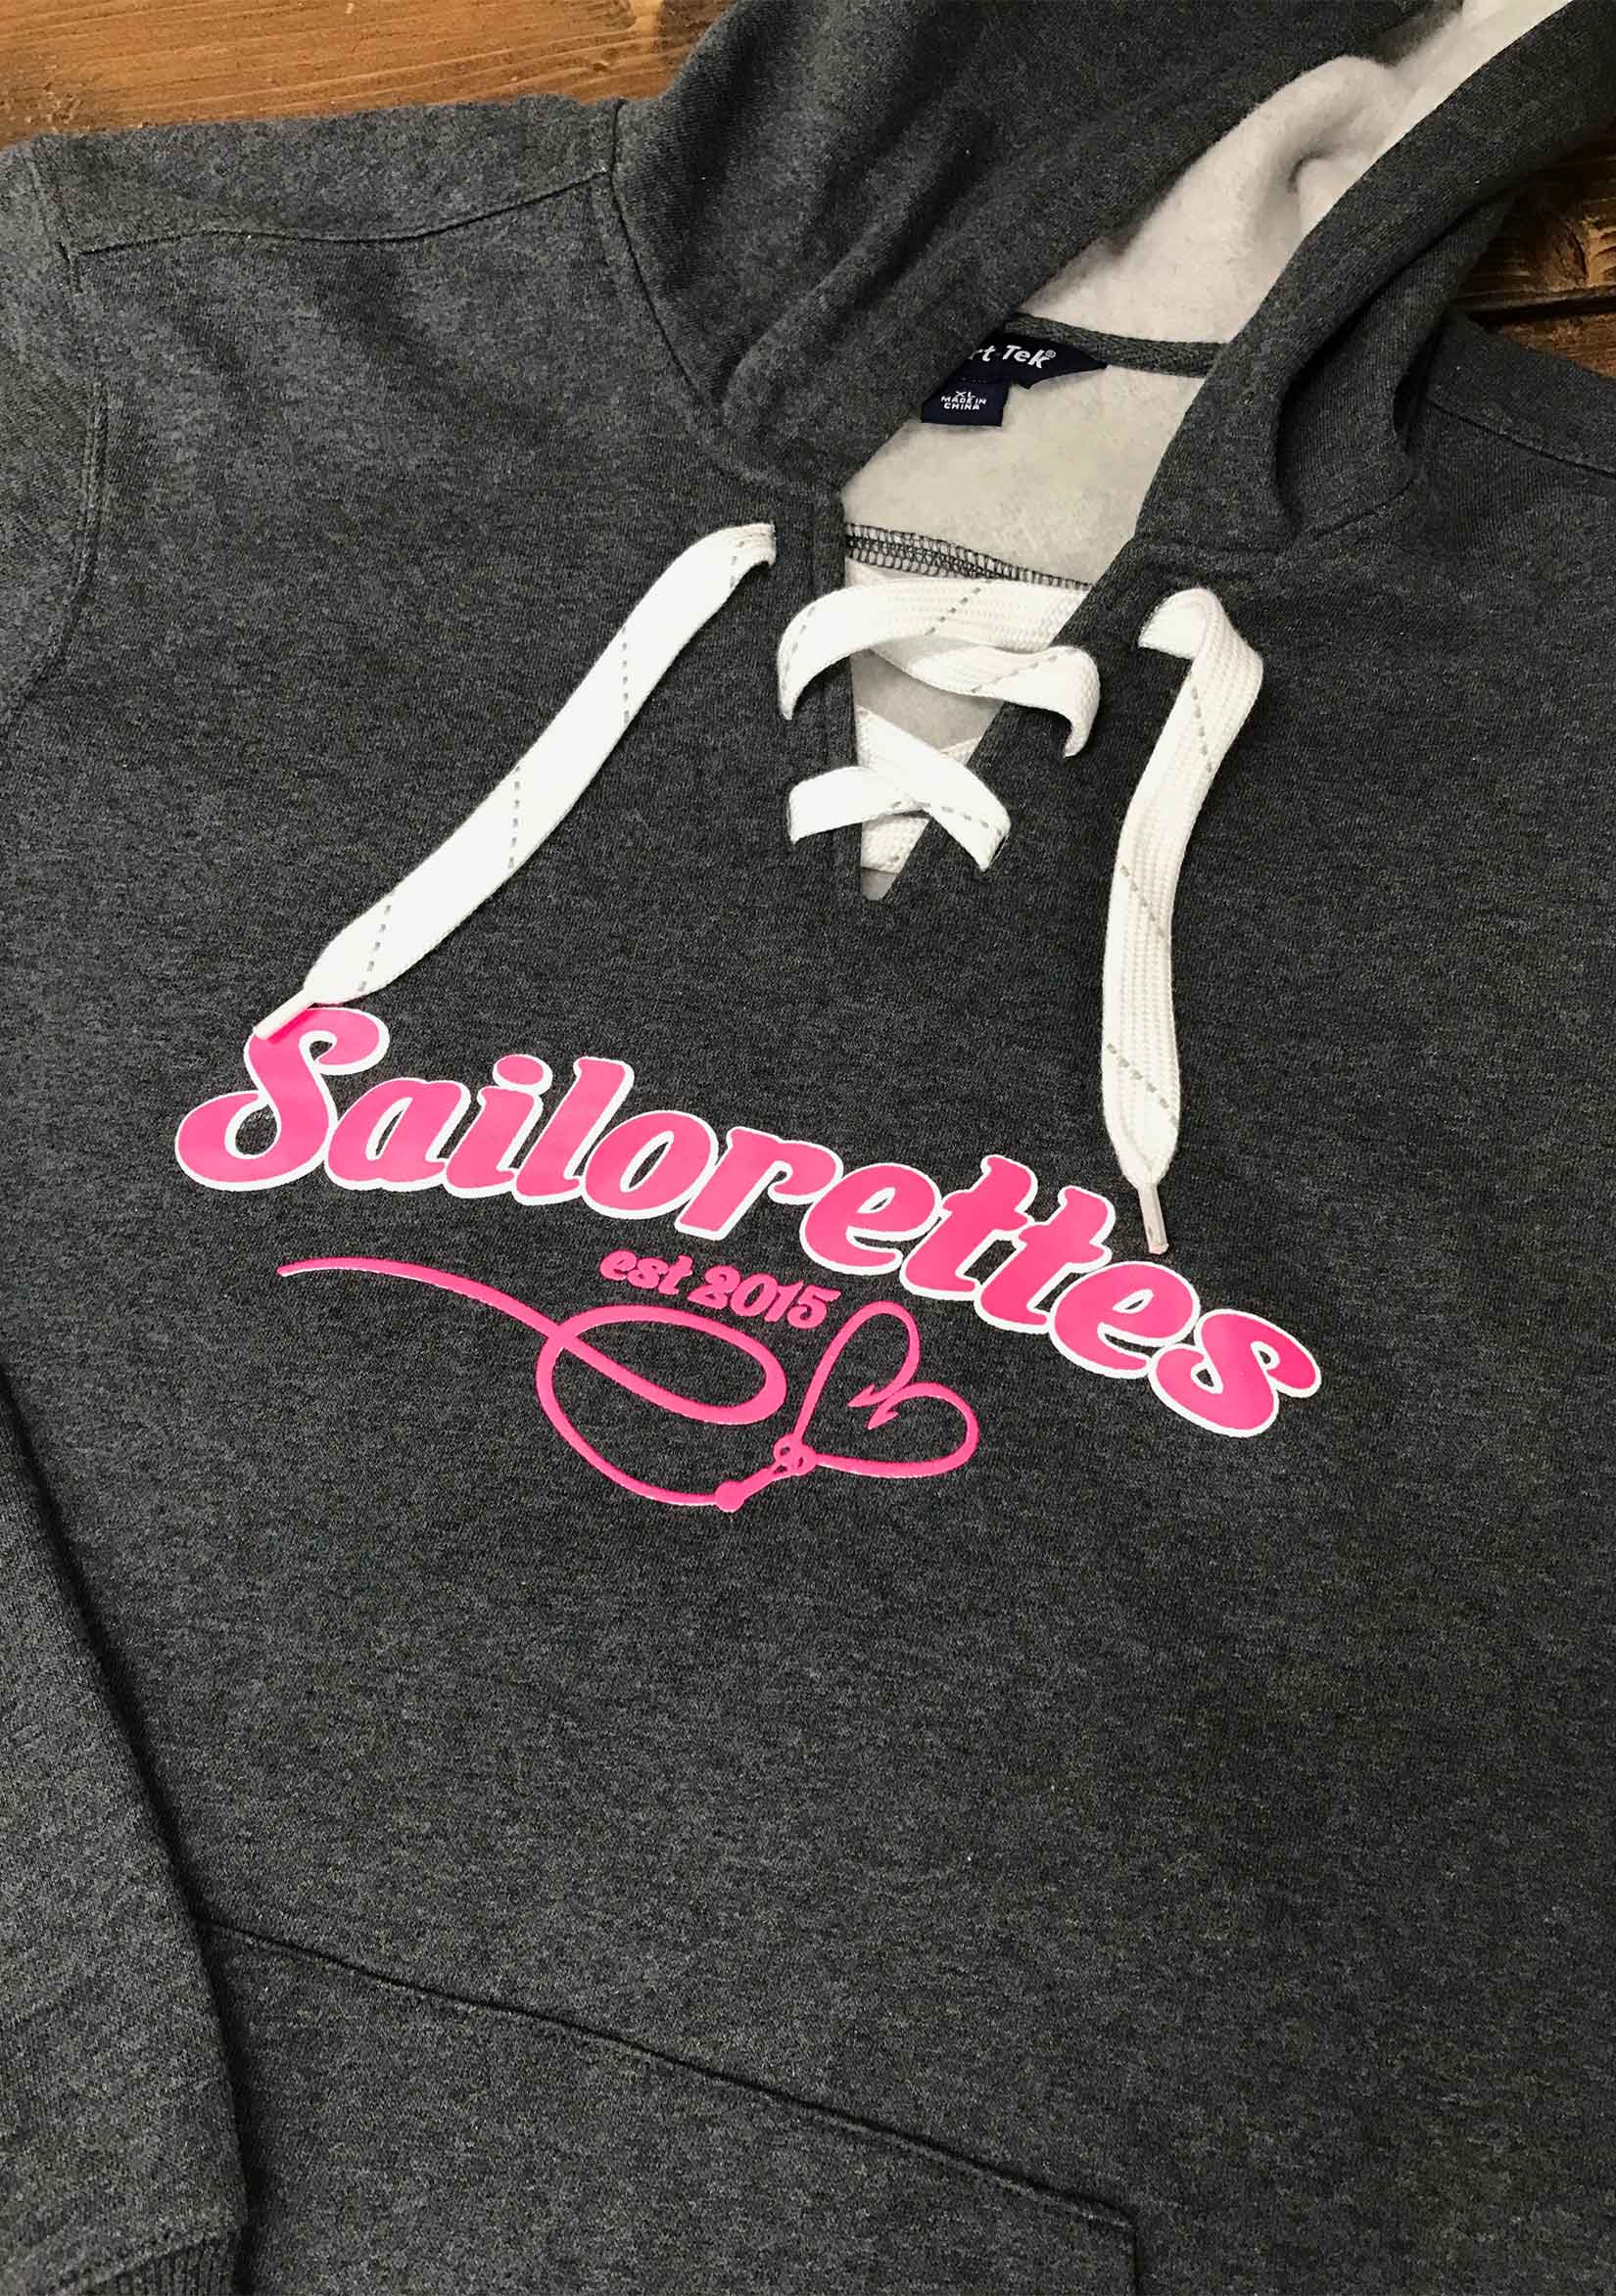 A pink logo for Sailorettes screen printed on the front of a gray hoodie